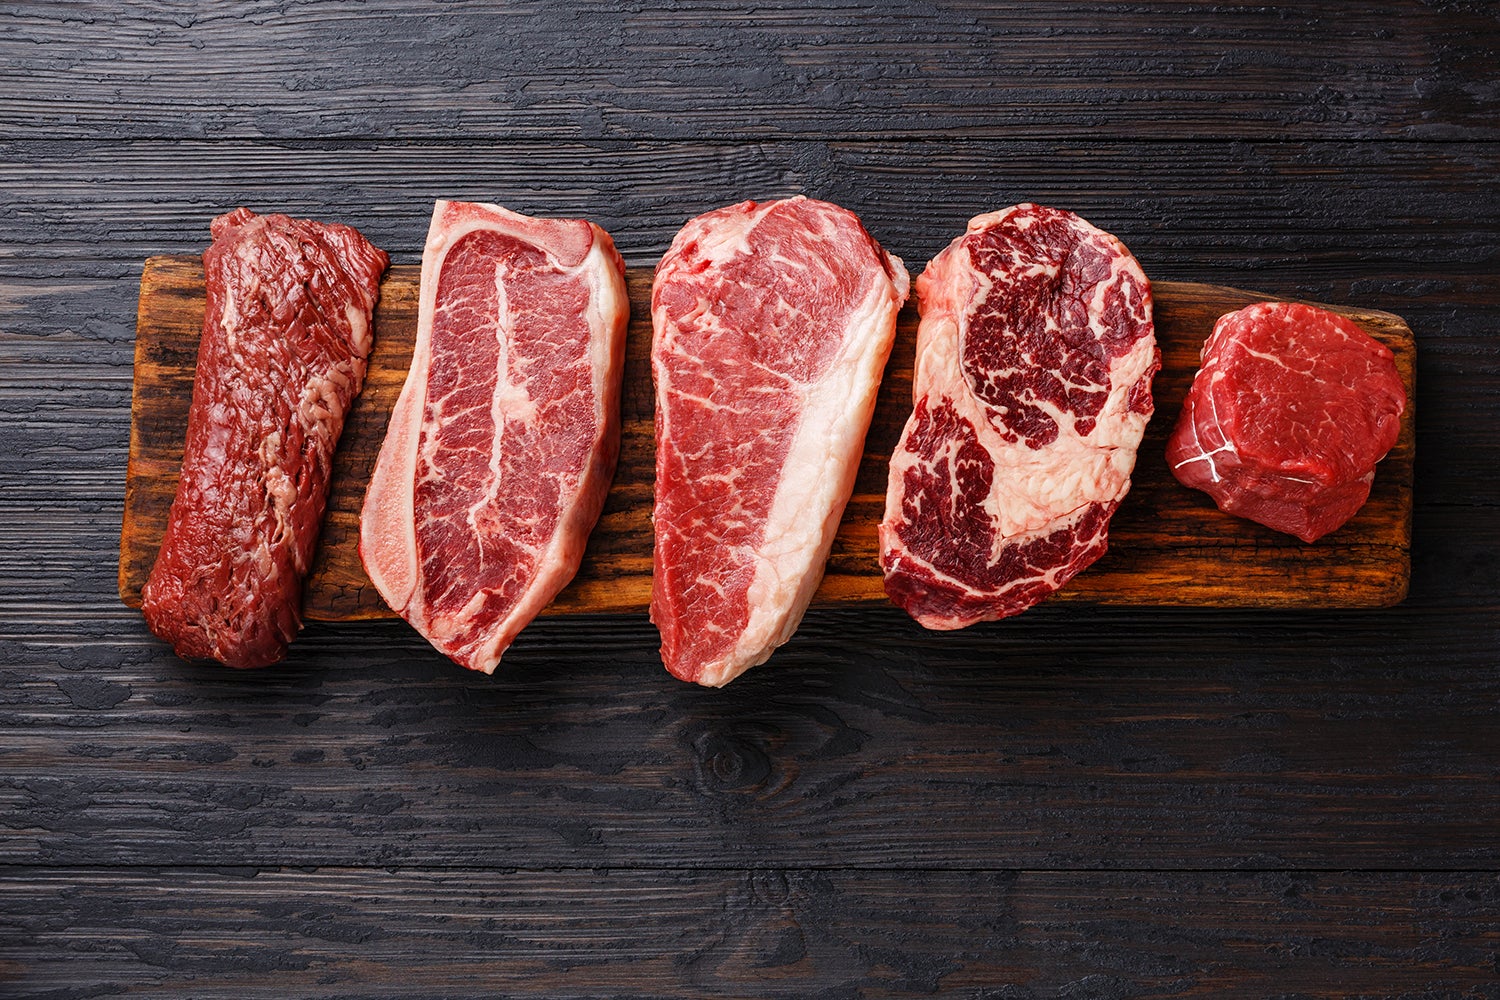 New System Evidence for Health Risks of Eating Red Meat, Smoking, and More--But Critics Say It's Overly Scientific American